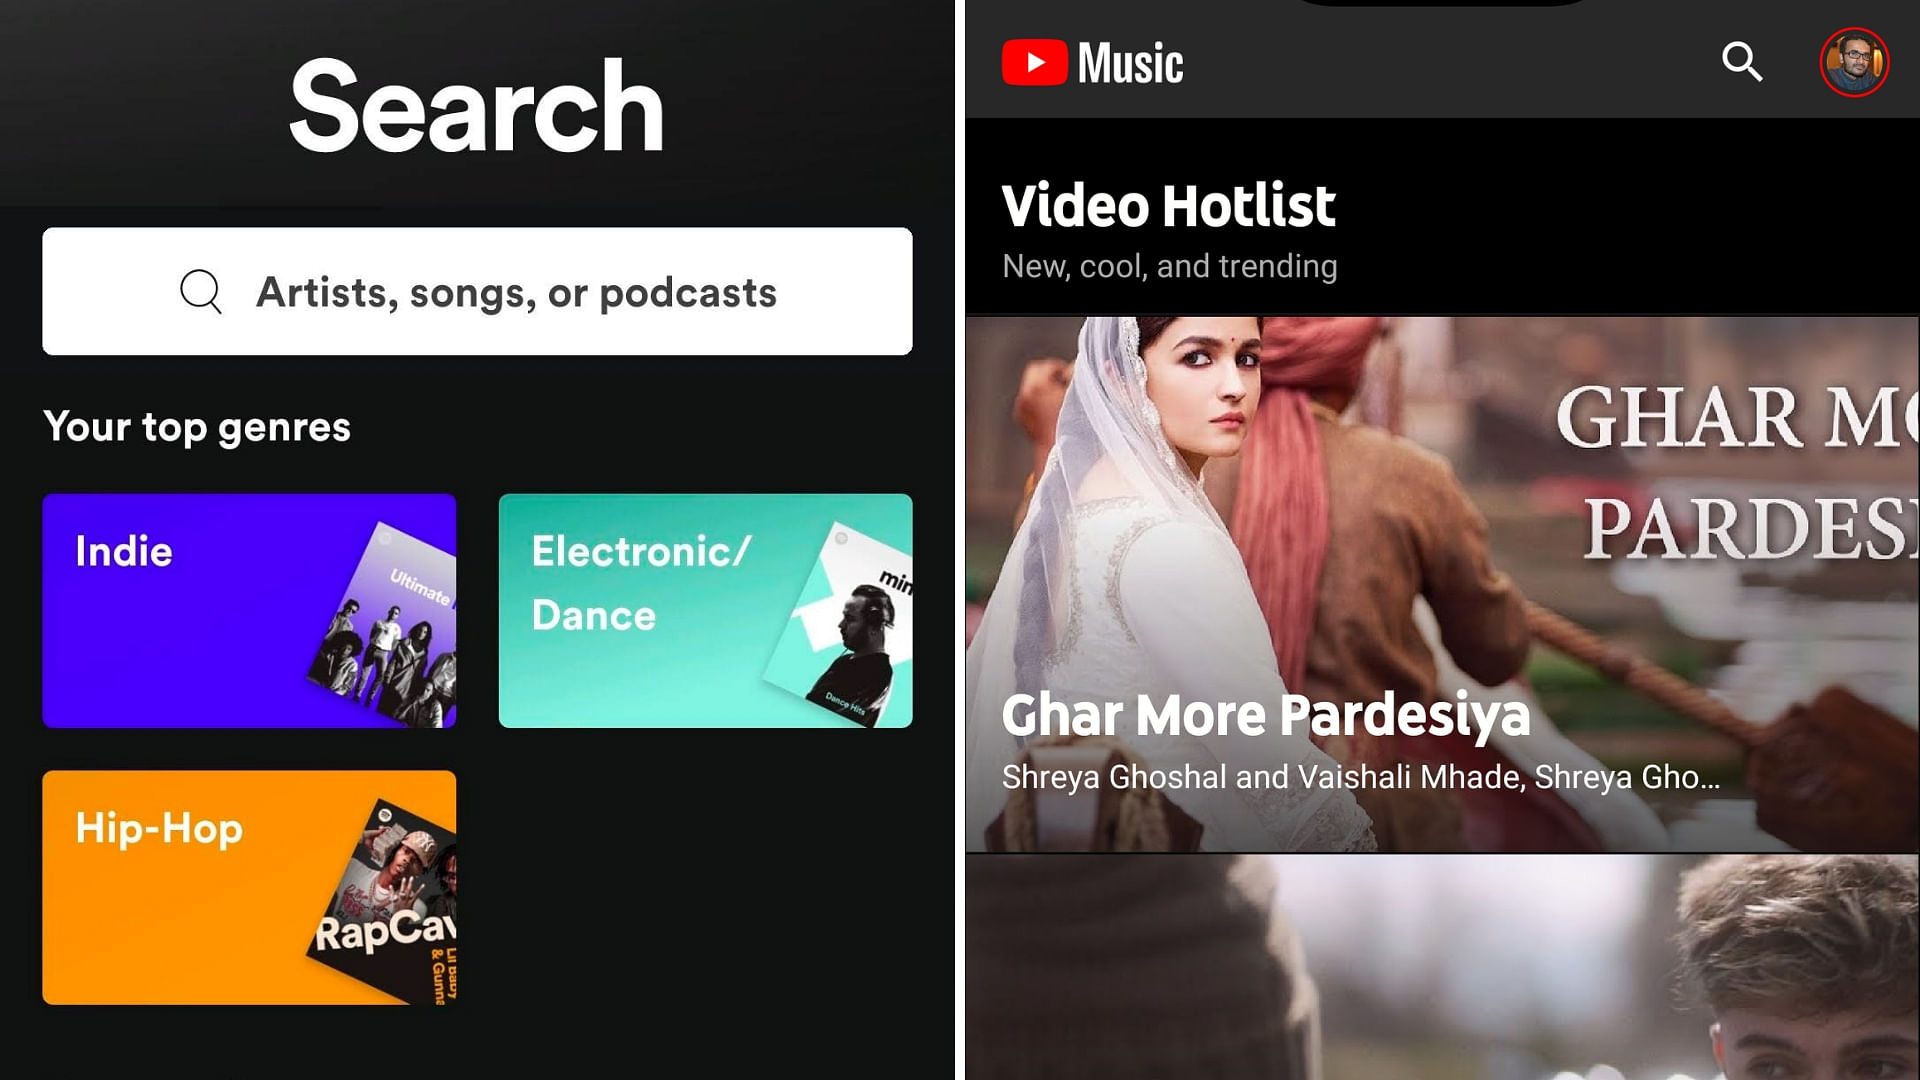 Both these music streaming apps have launched in India this year.